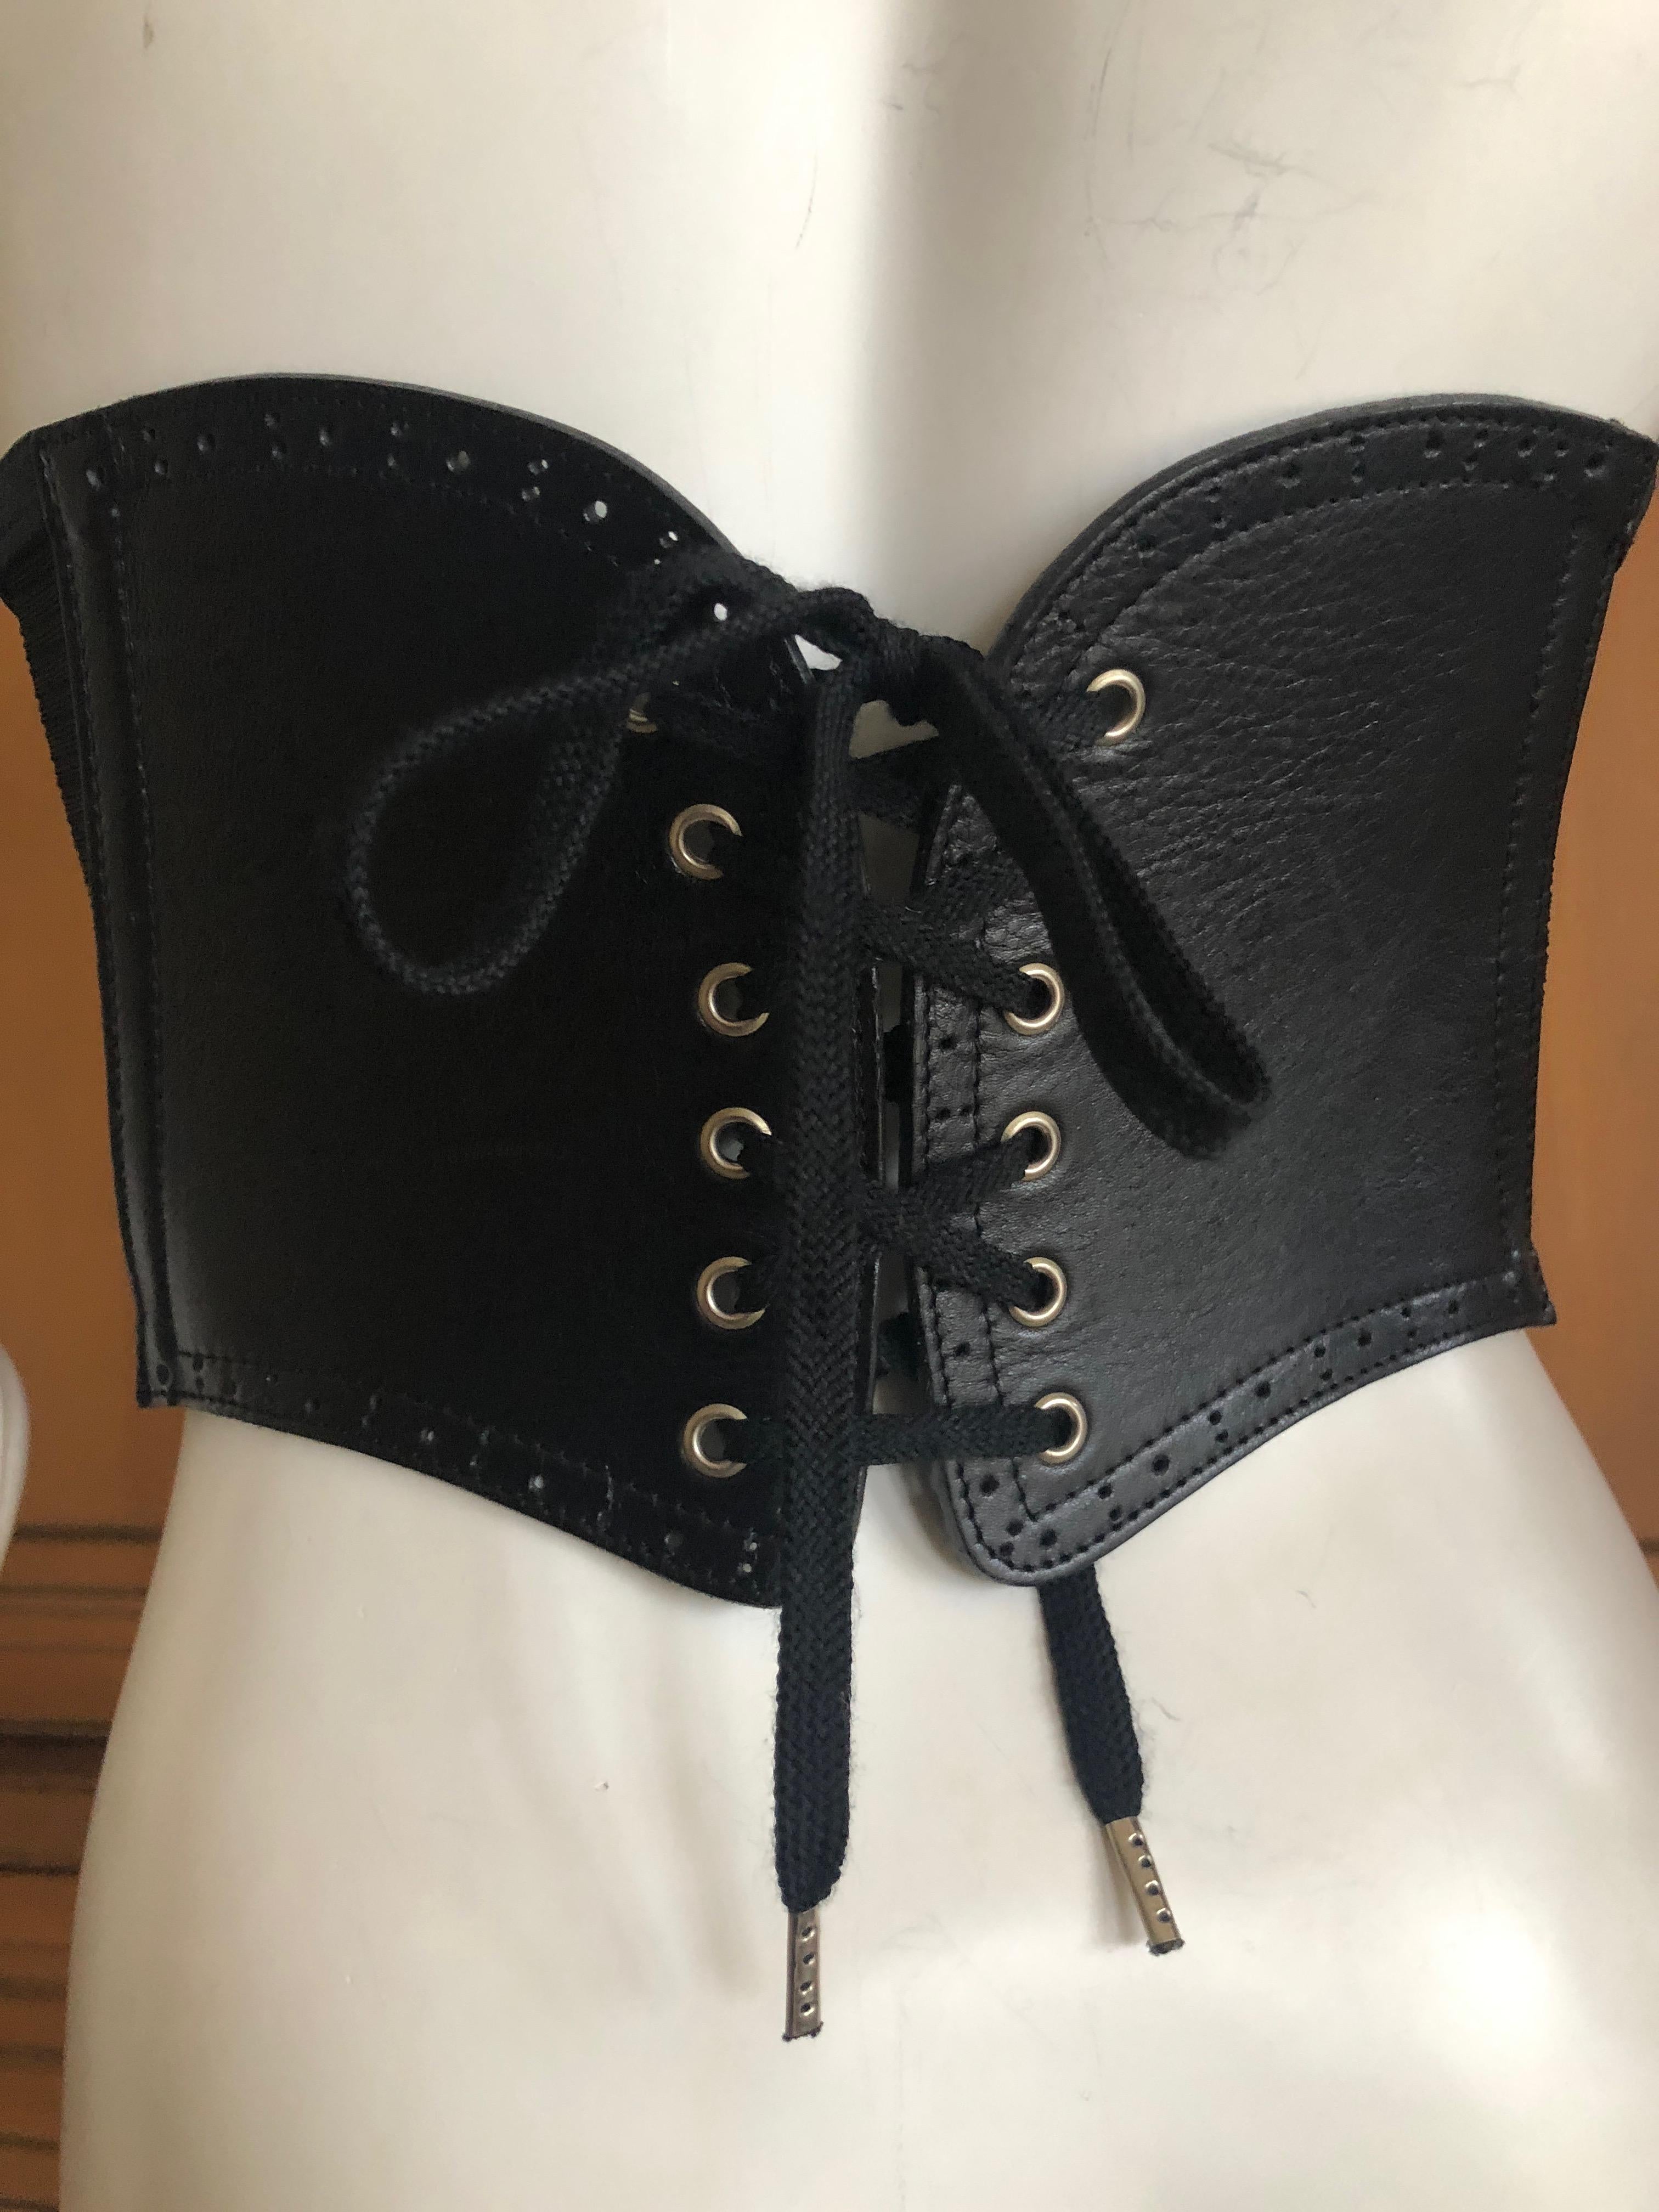 Jean Paul Gaultier Black Leather Harness with Corset Laced Details.
Unisex, marked size 42
Will fit 23